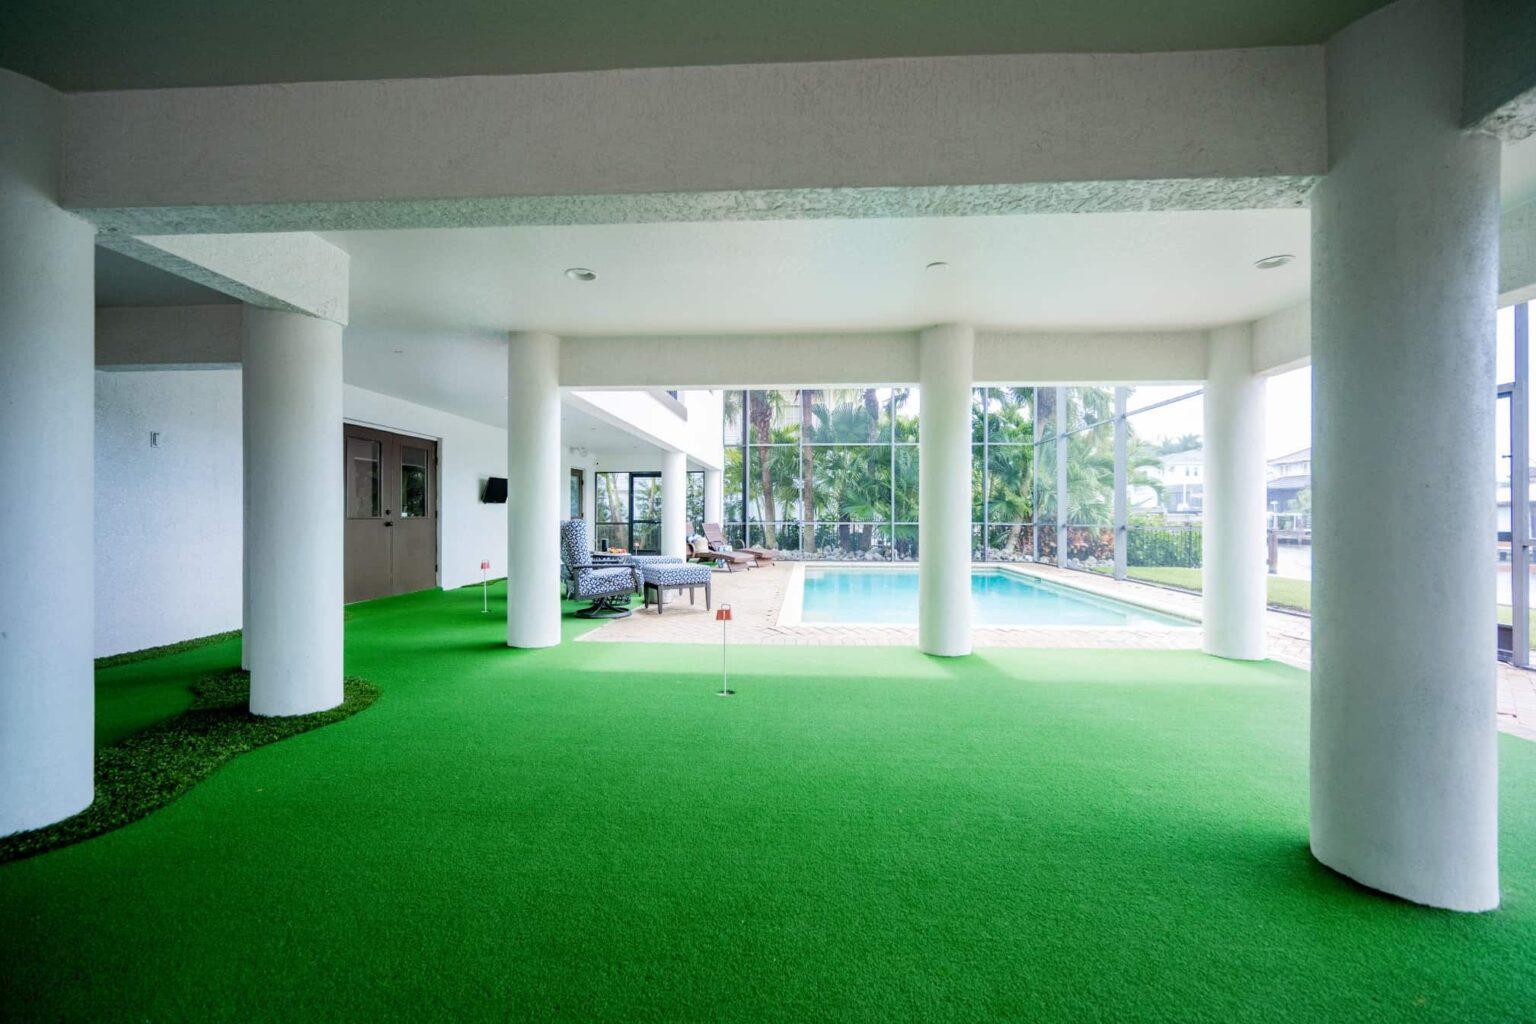 naples fl vacation home 9 Hole Putting Green backyard pool and covered putting green